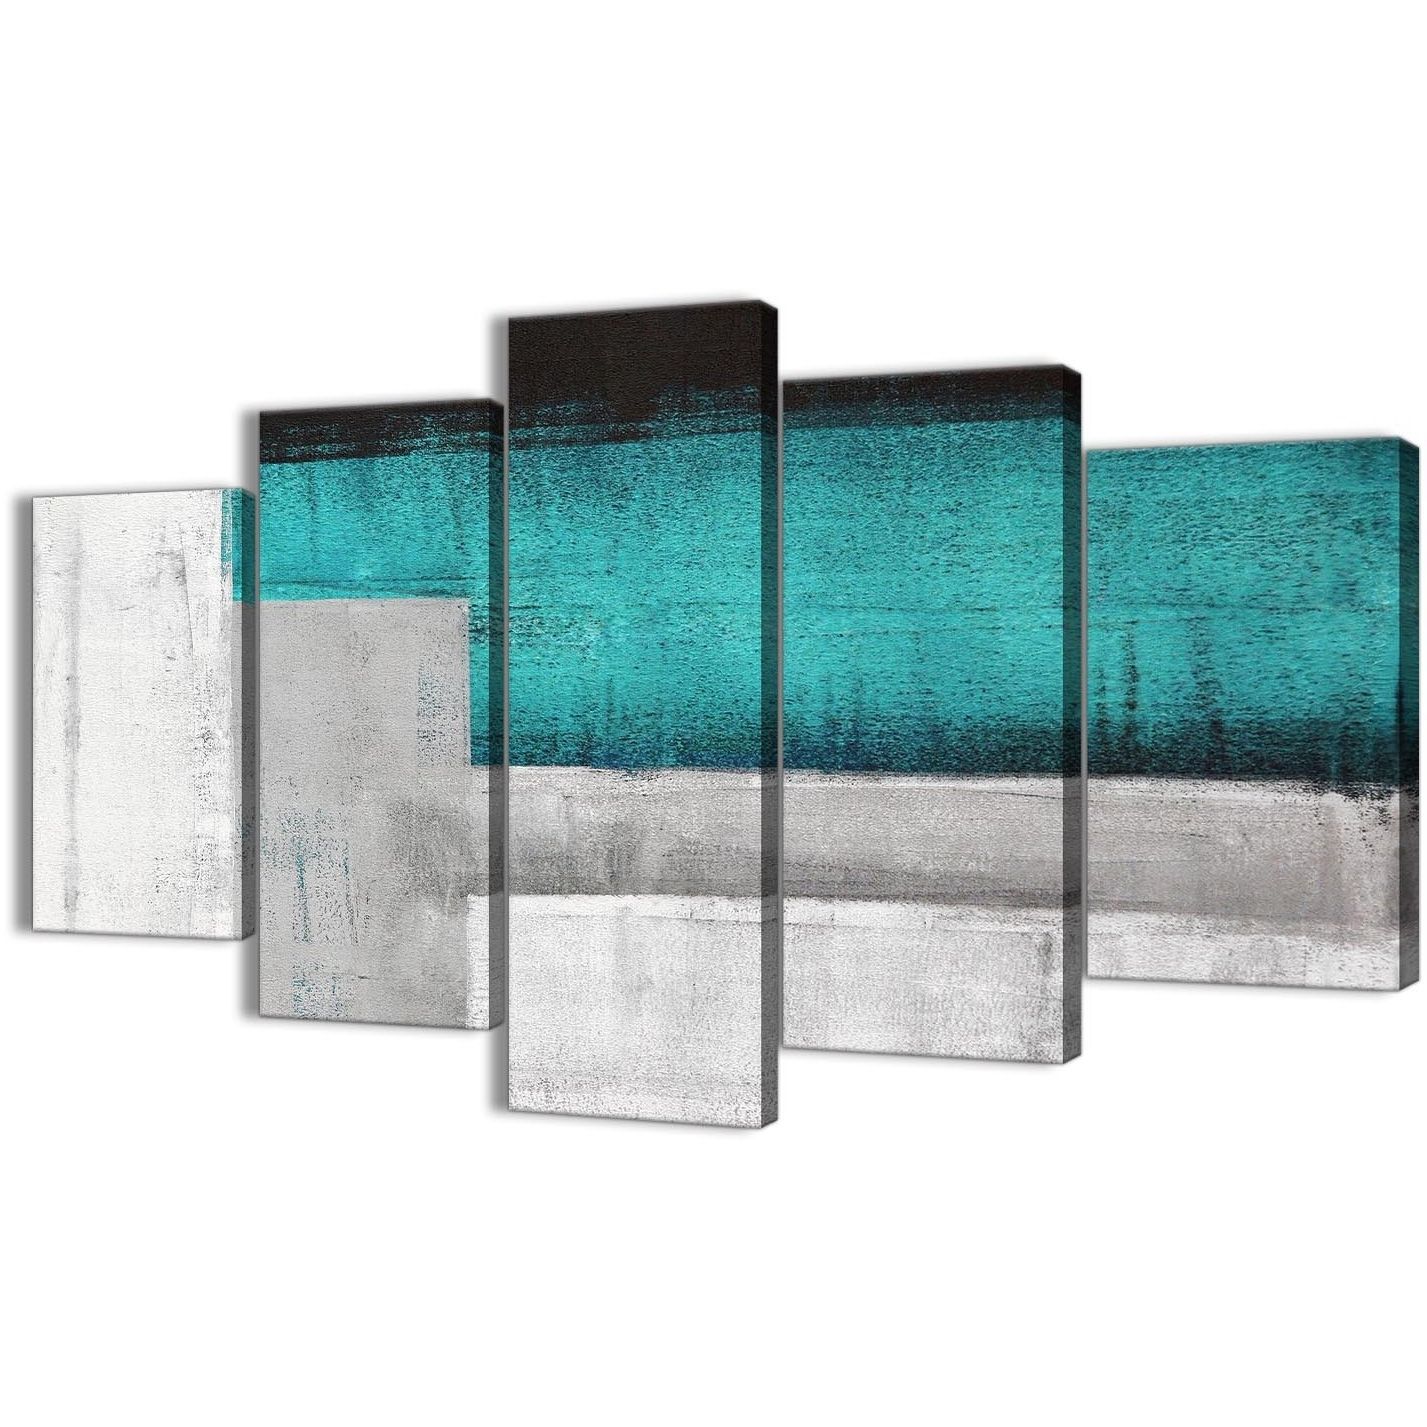 Turquoise Wall Art Intended For Most Recently Released 5 Panel Teal Turquoise Grey Painting Abstract Office Canvas Wall Art (View 10 of 15)